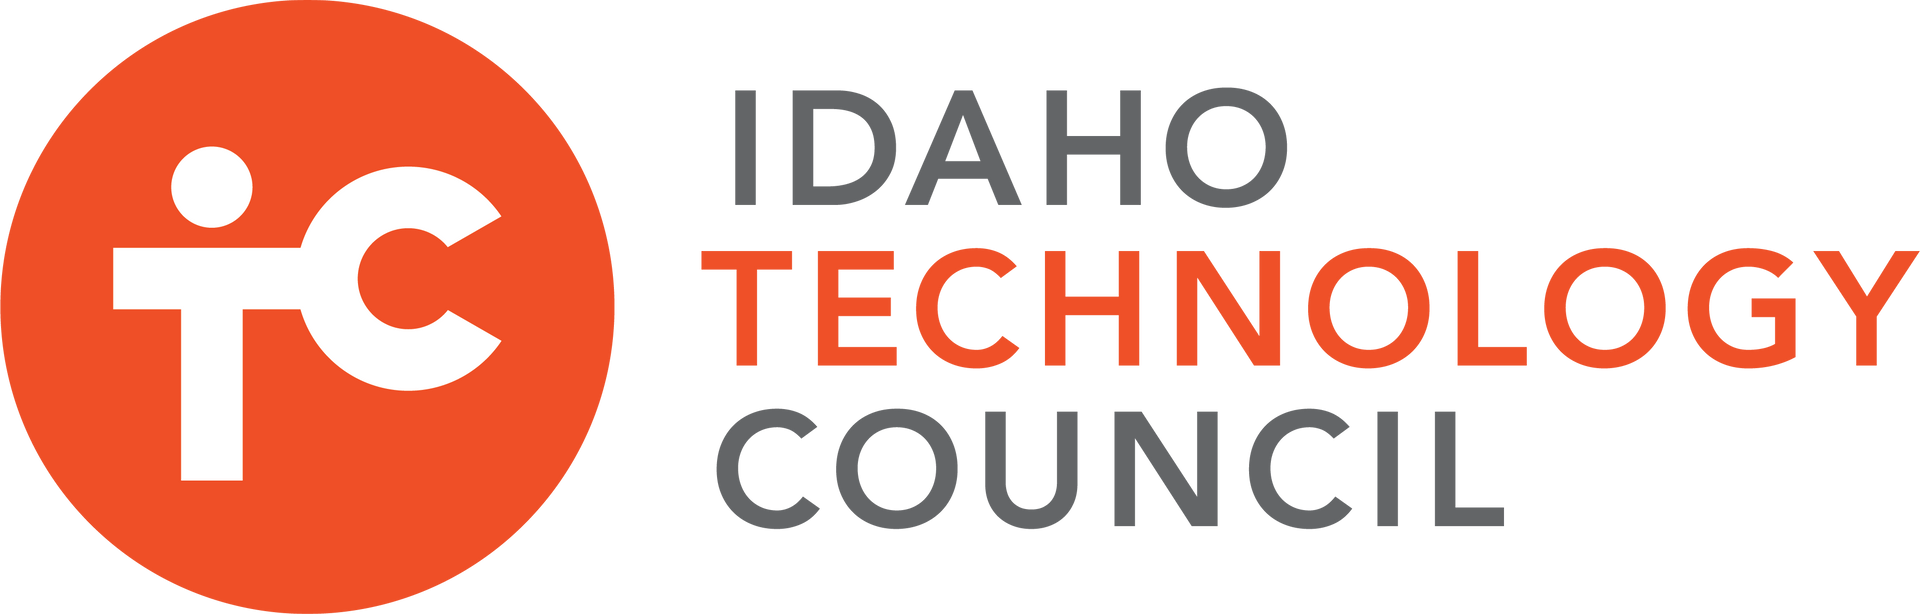 The logo for the idaho technology council is red and white.